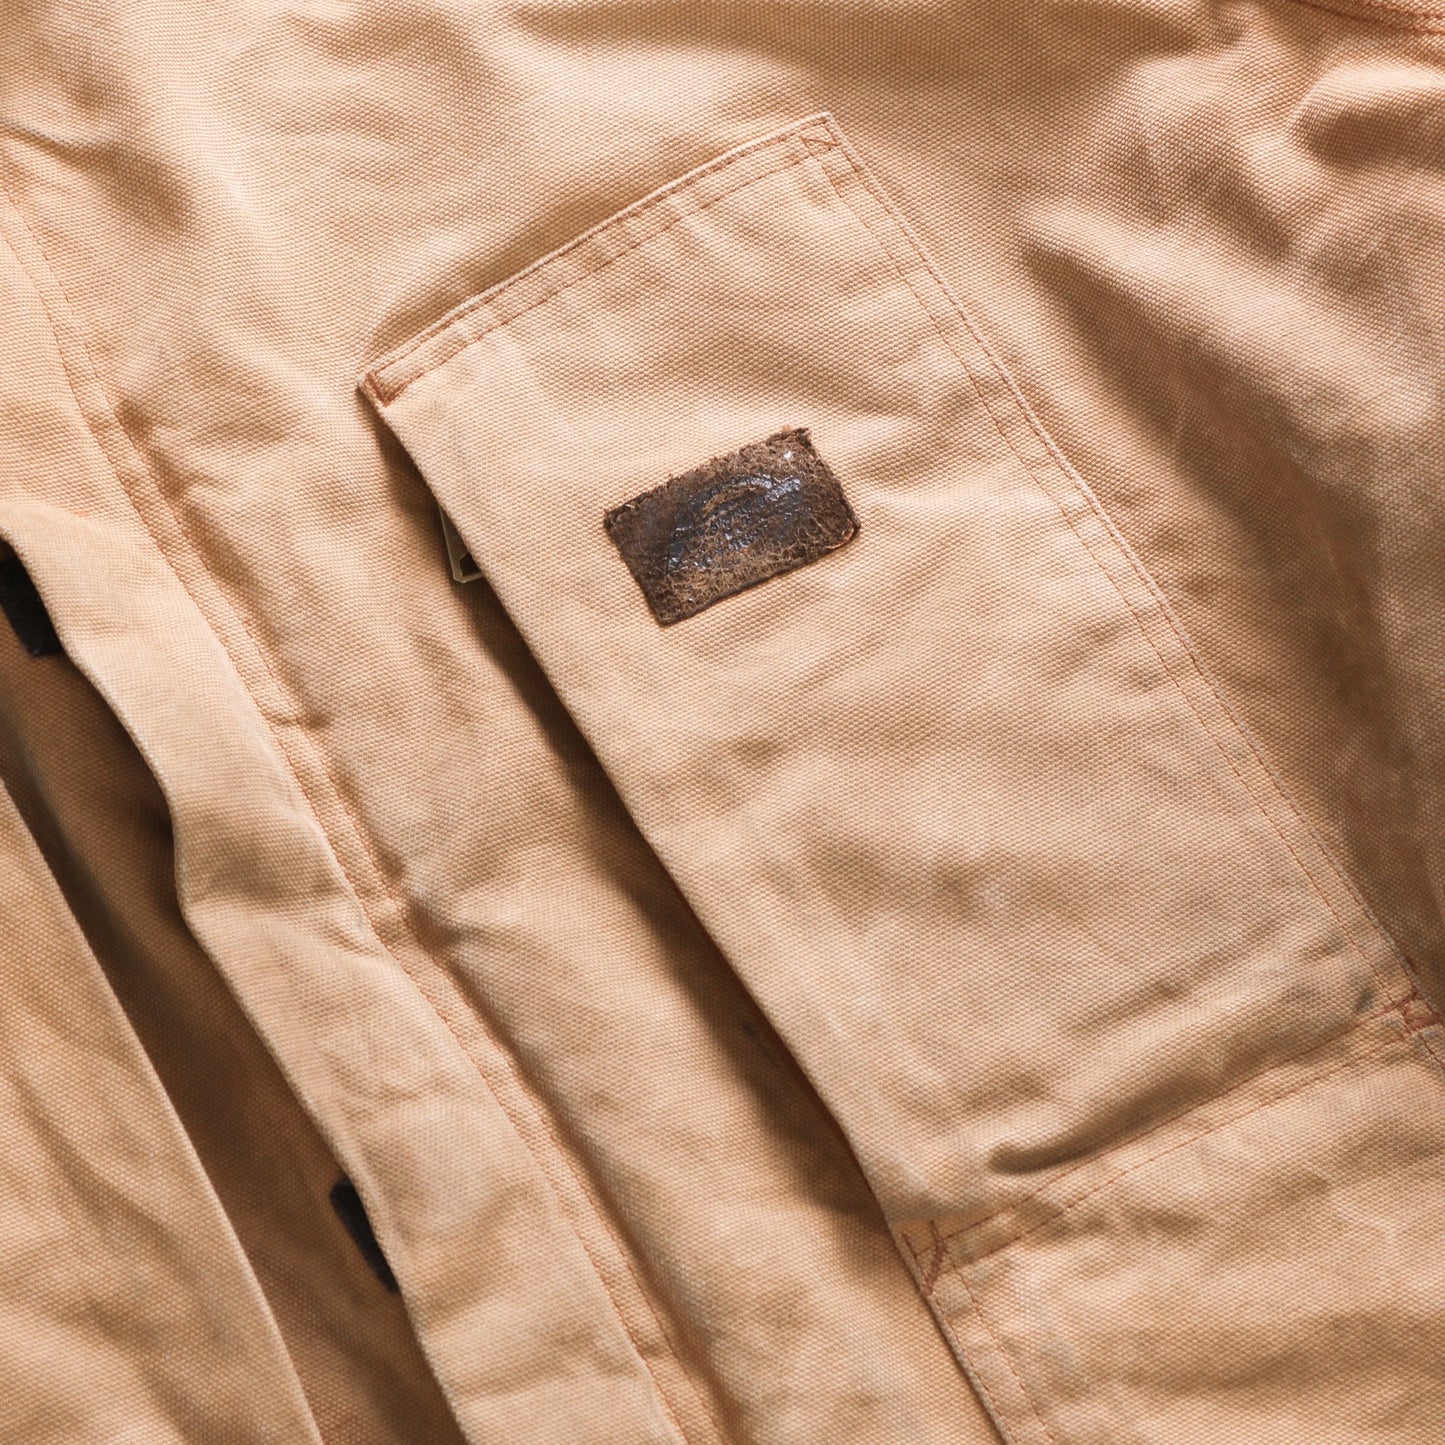 Workwear Jacket - Brown - American Madness